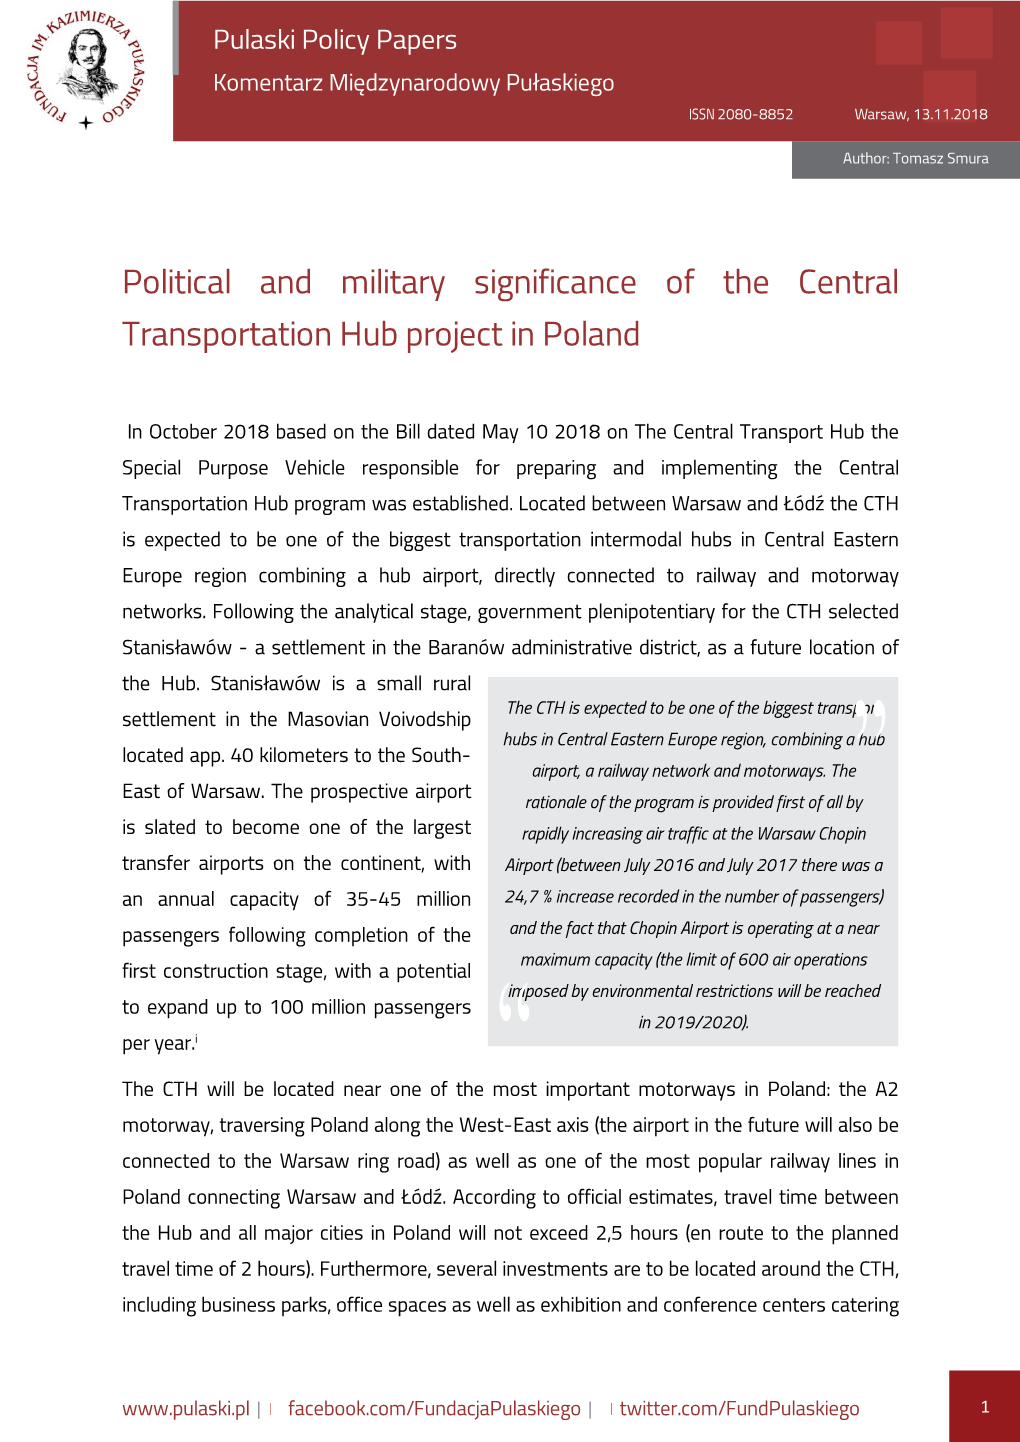 Political and Military Significance of the Central Transportation Hub Project in Poland